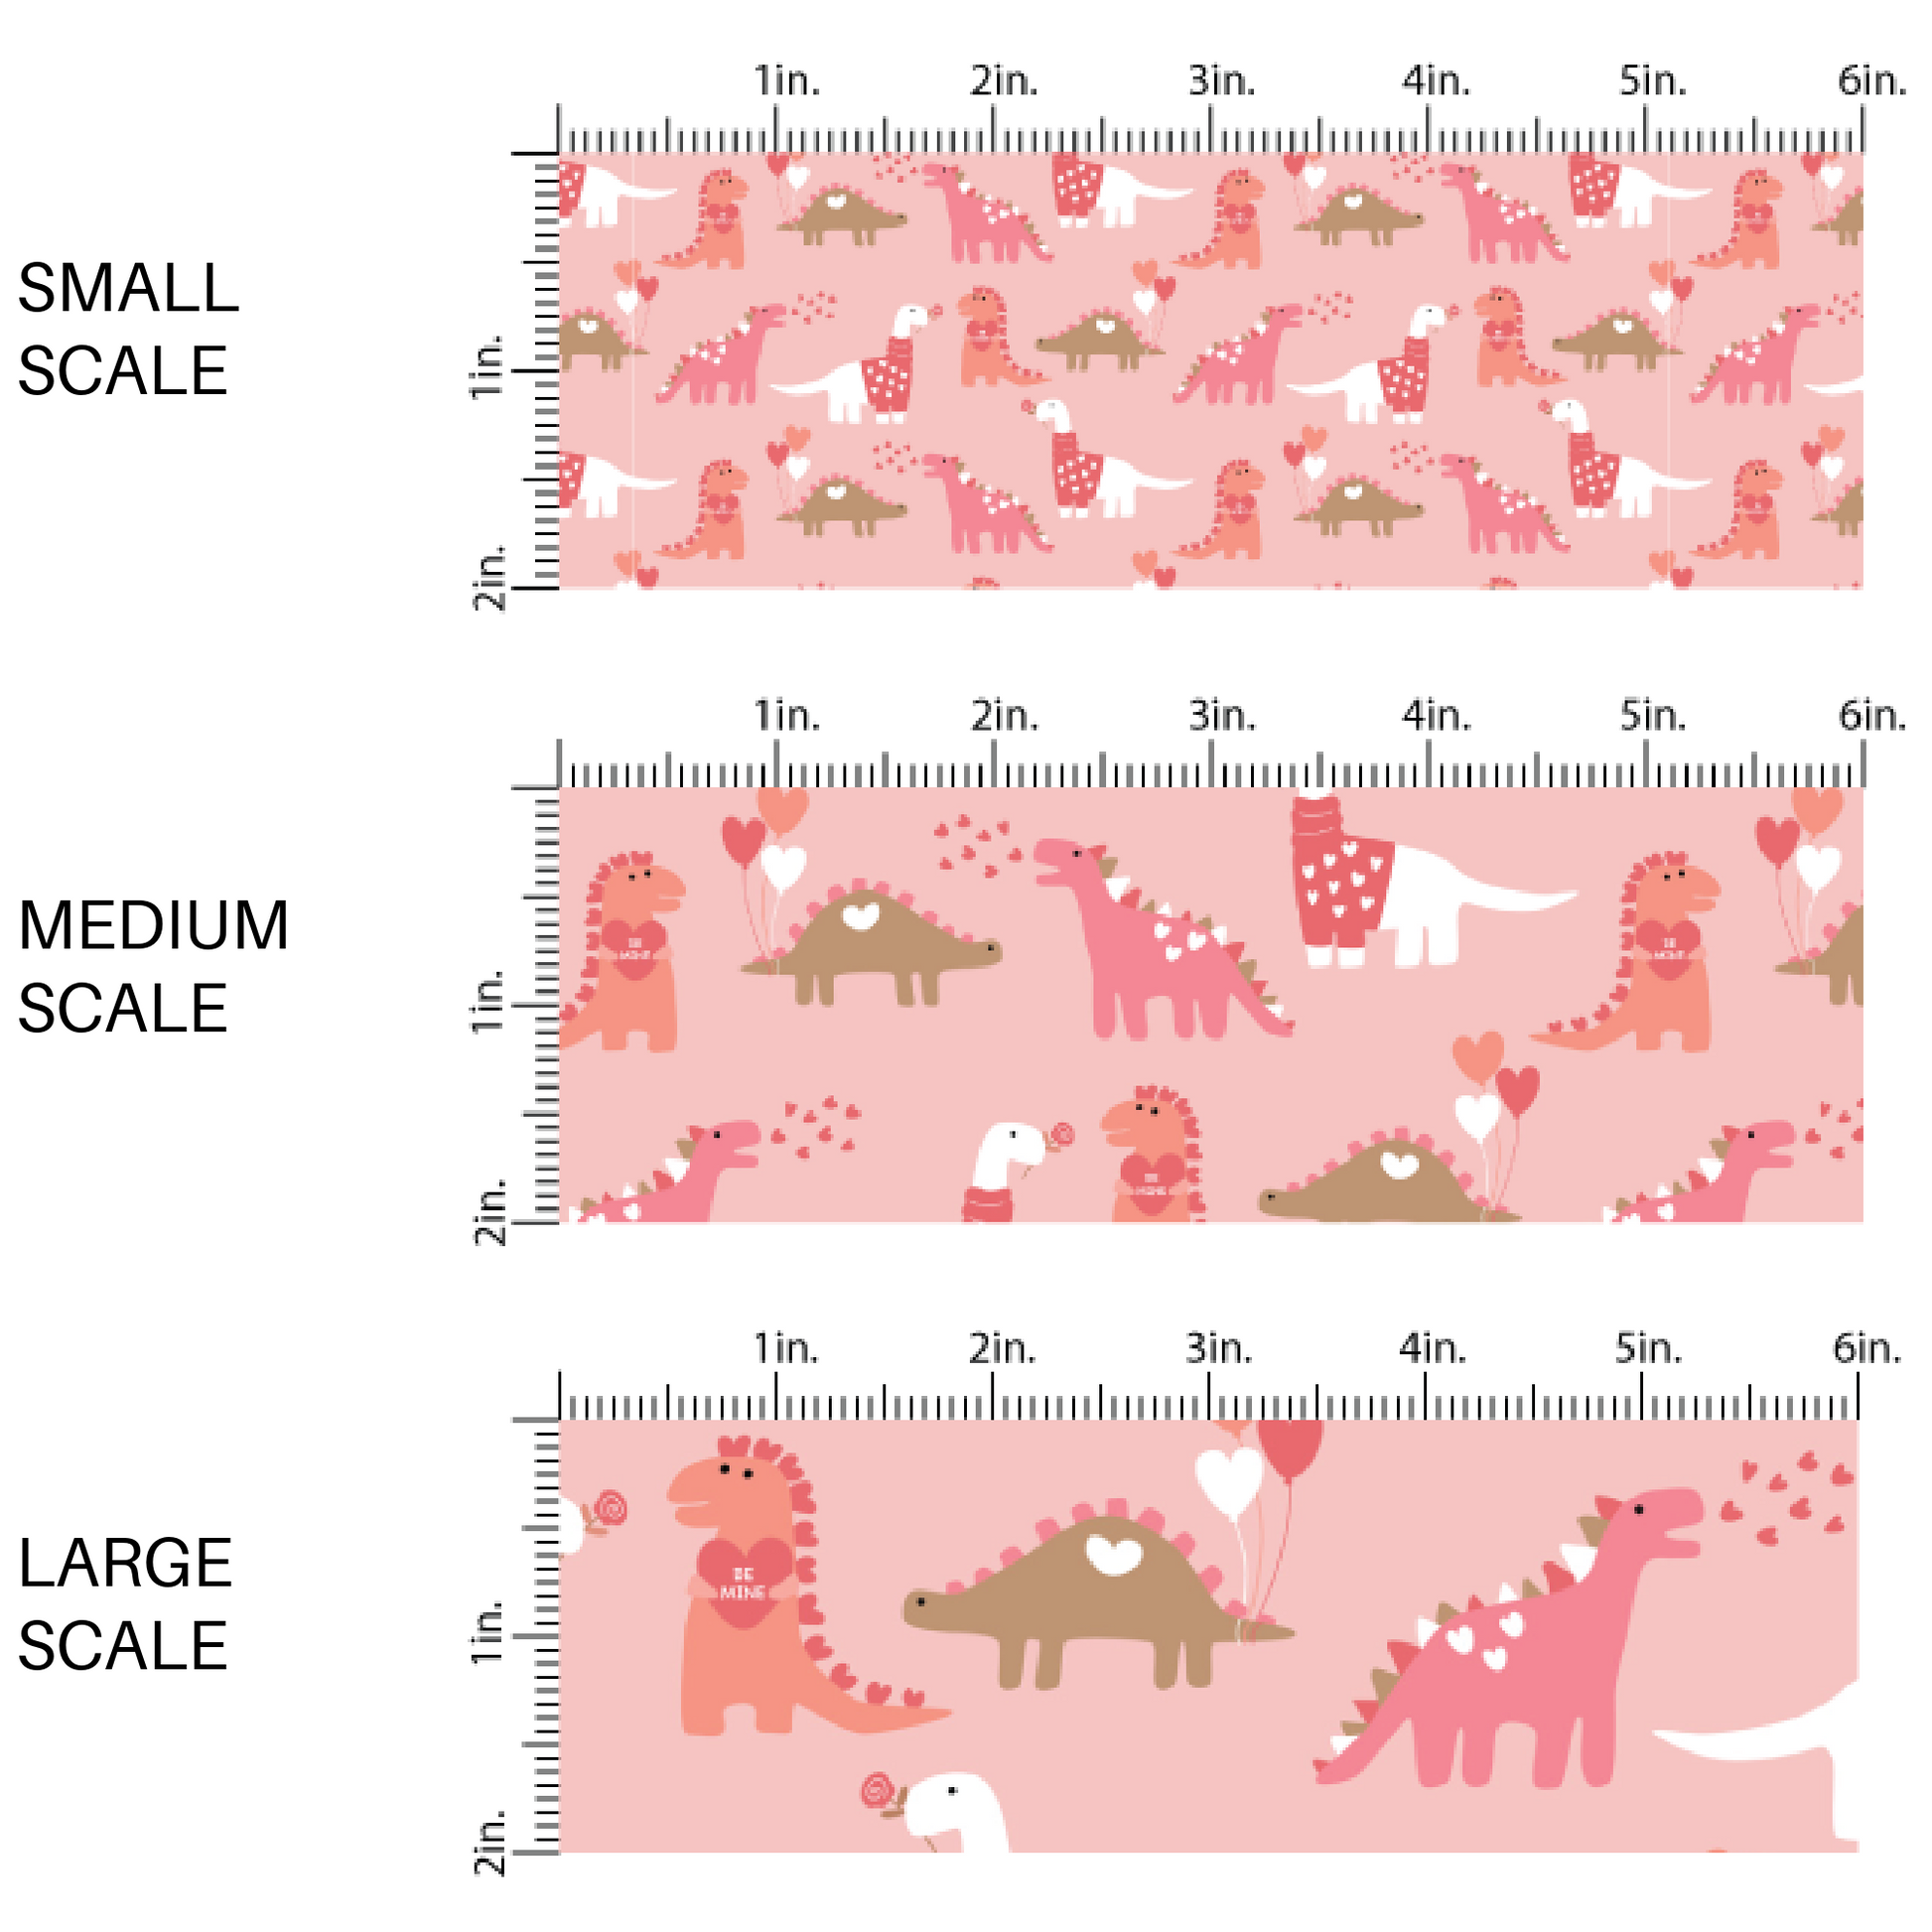 Pink fabric by the yard scaled image guide with cartoon dinosaurs and heart balloons - Valentine's Day Fabric 